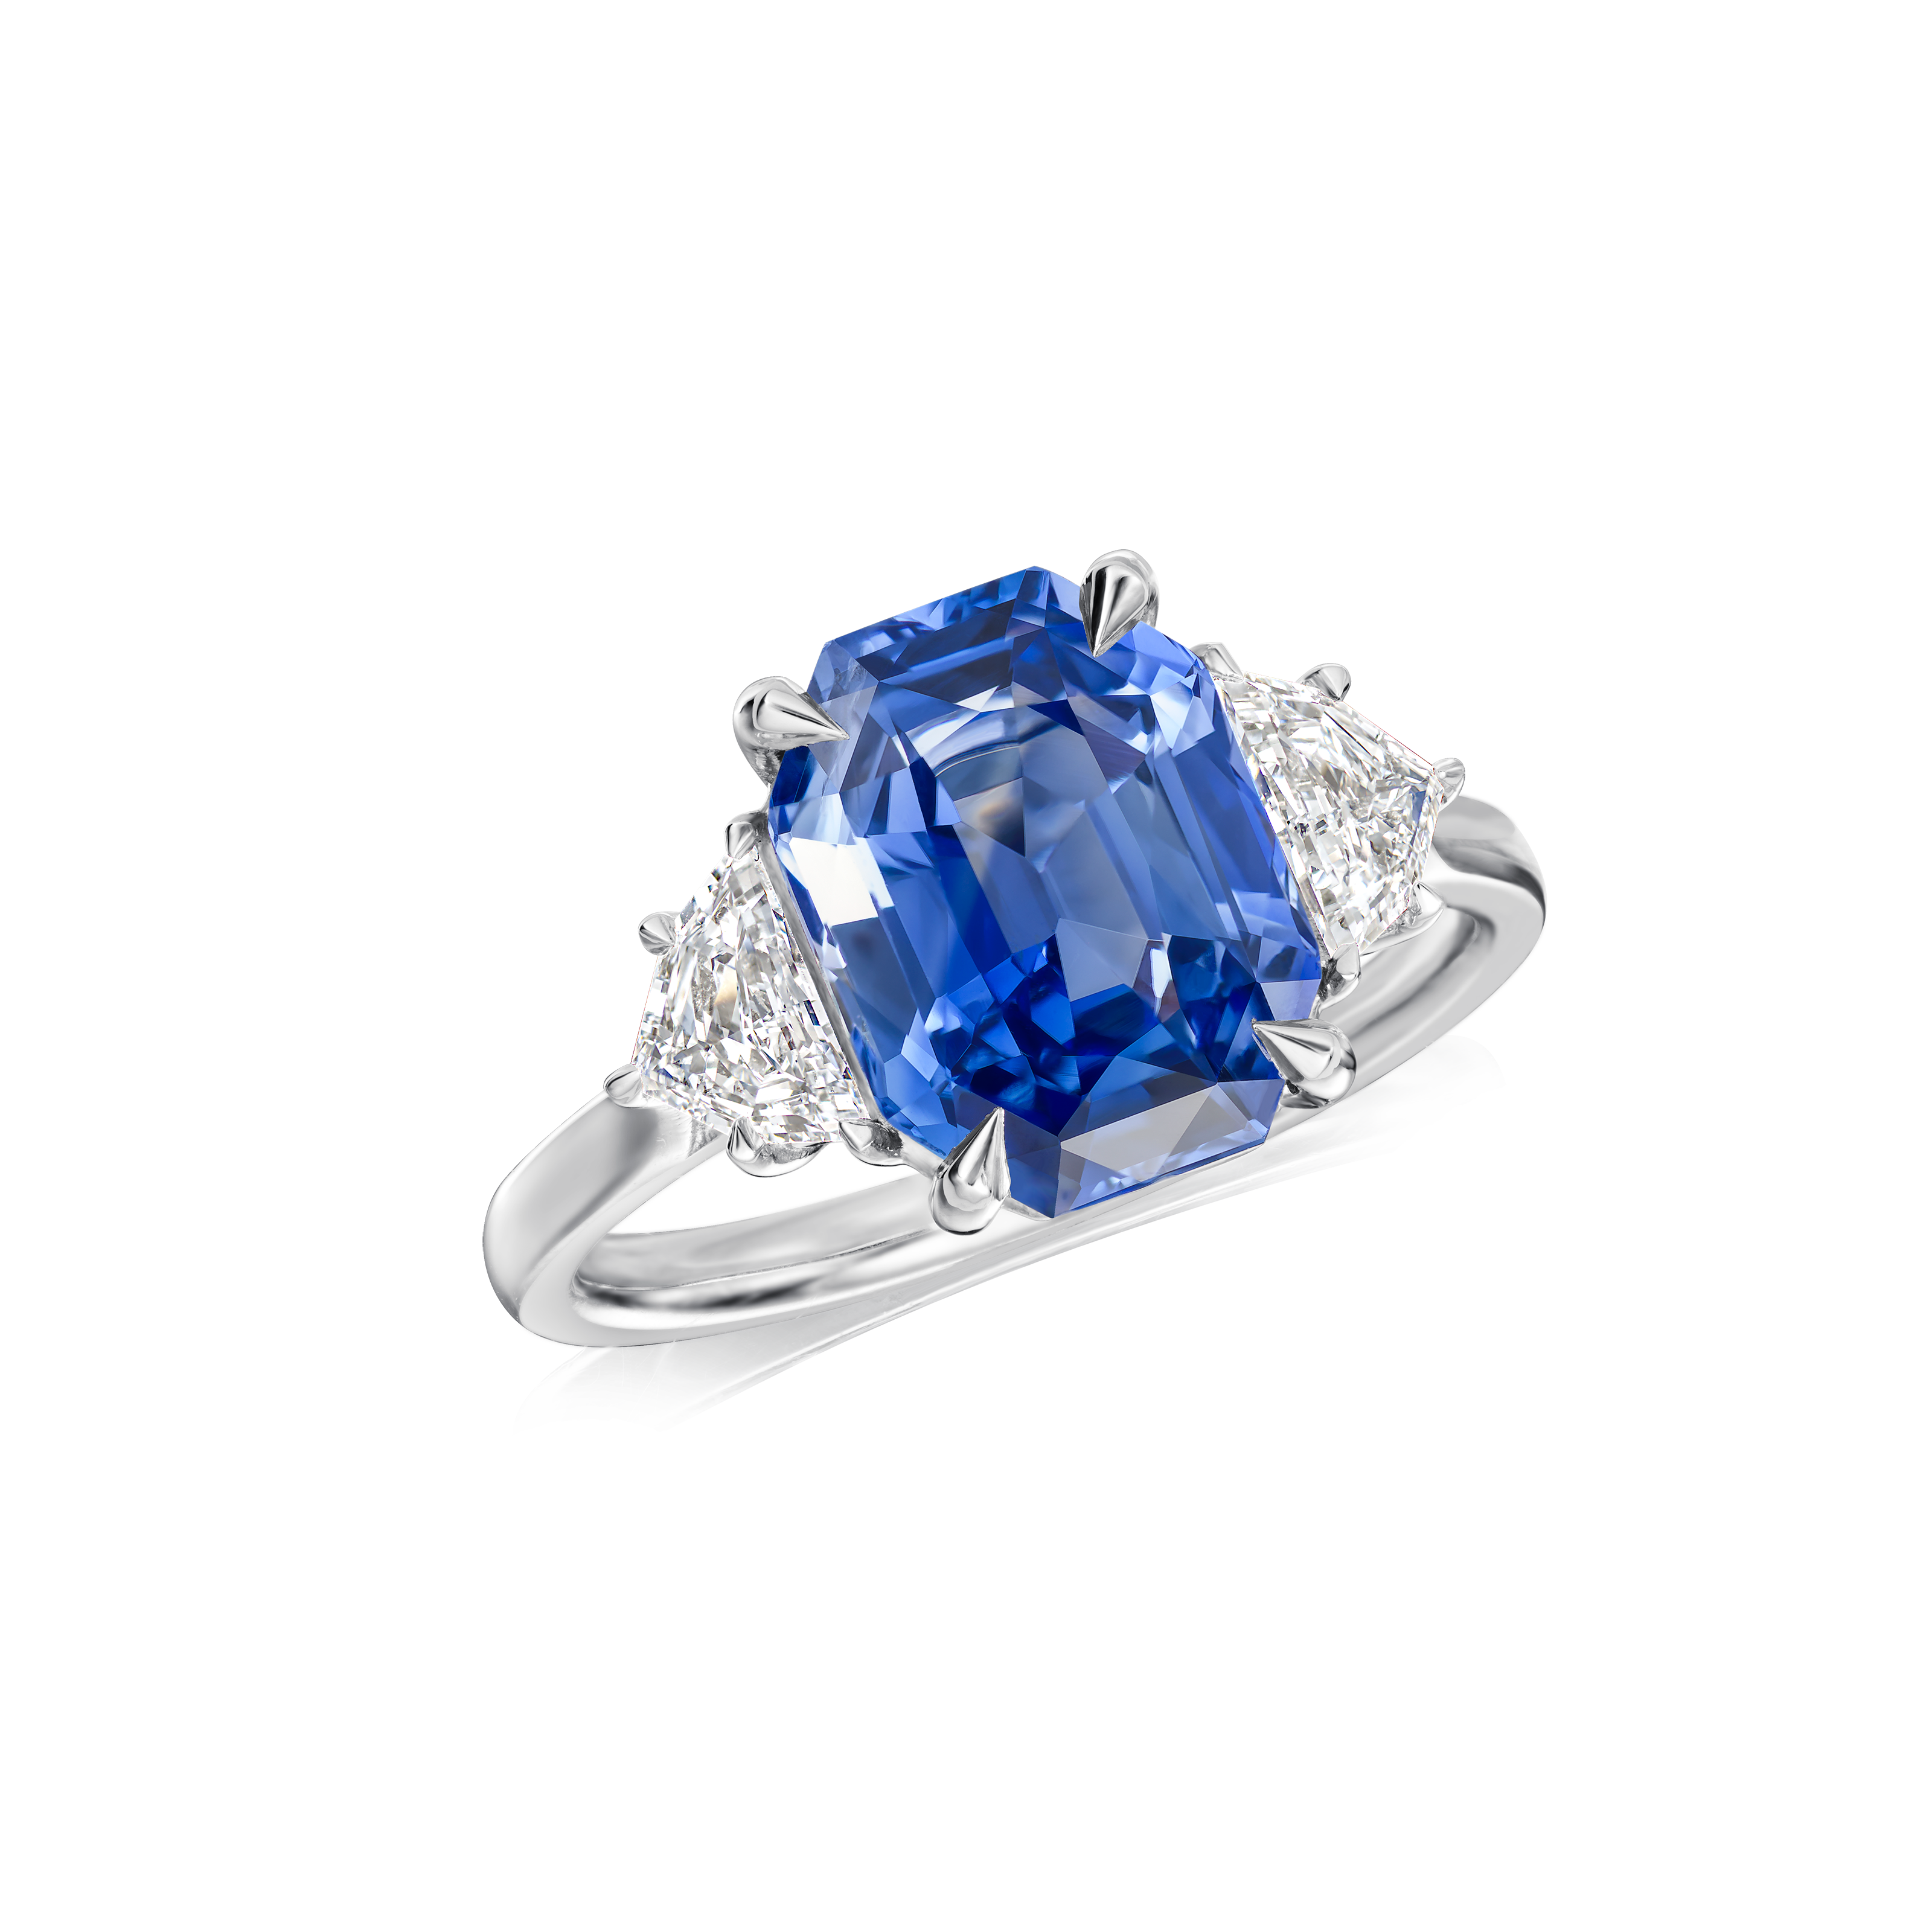 Natural Untreated Octagonal Cut Sapphire and Diamond Ring